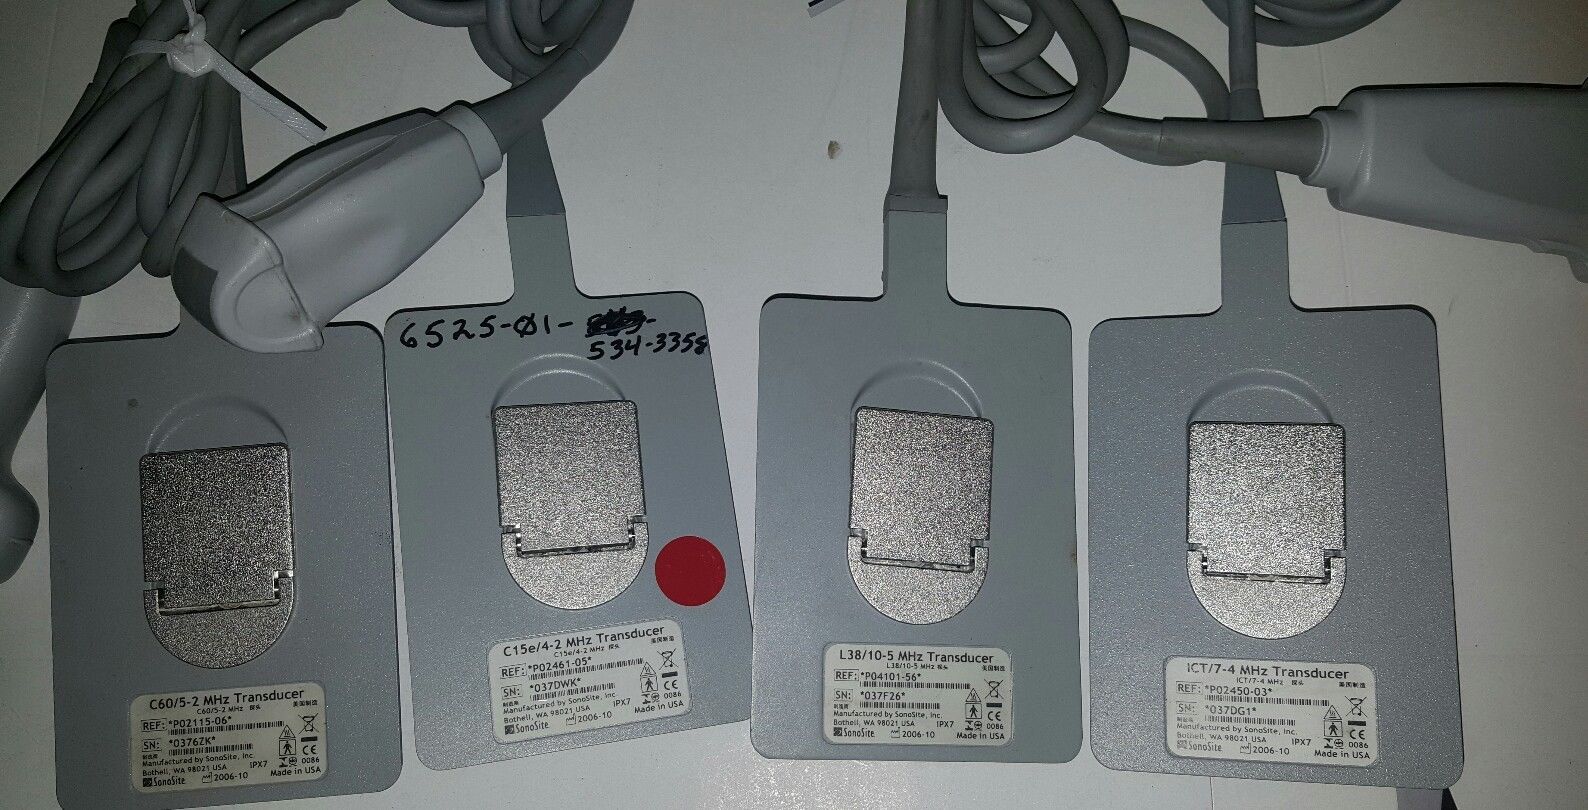 Lot of 4 SonoSite Ultrasound Probes As is Untested DIAGNOSTIC ULTRASOUND MACHINES FOR SALE